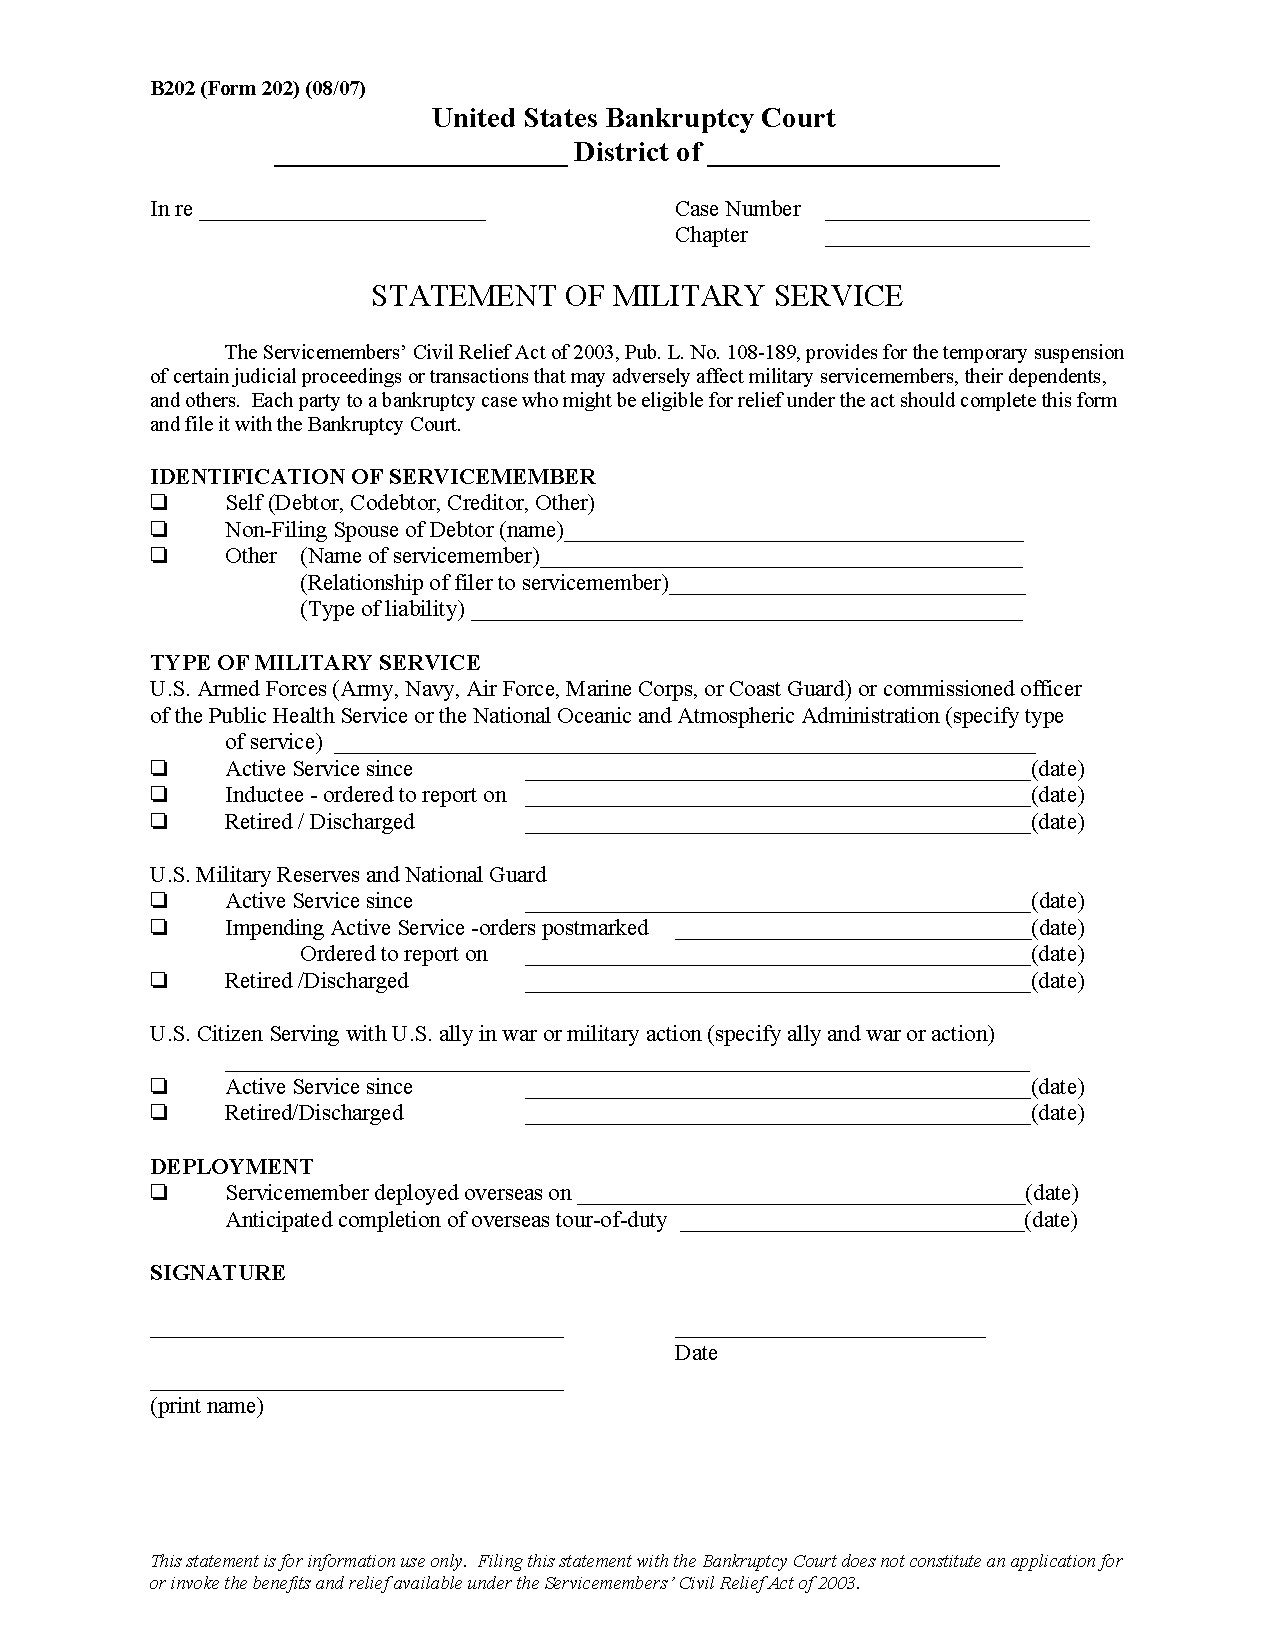 Statement Of Service Army Example form B 202 Statement Of Military Service 08 07